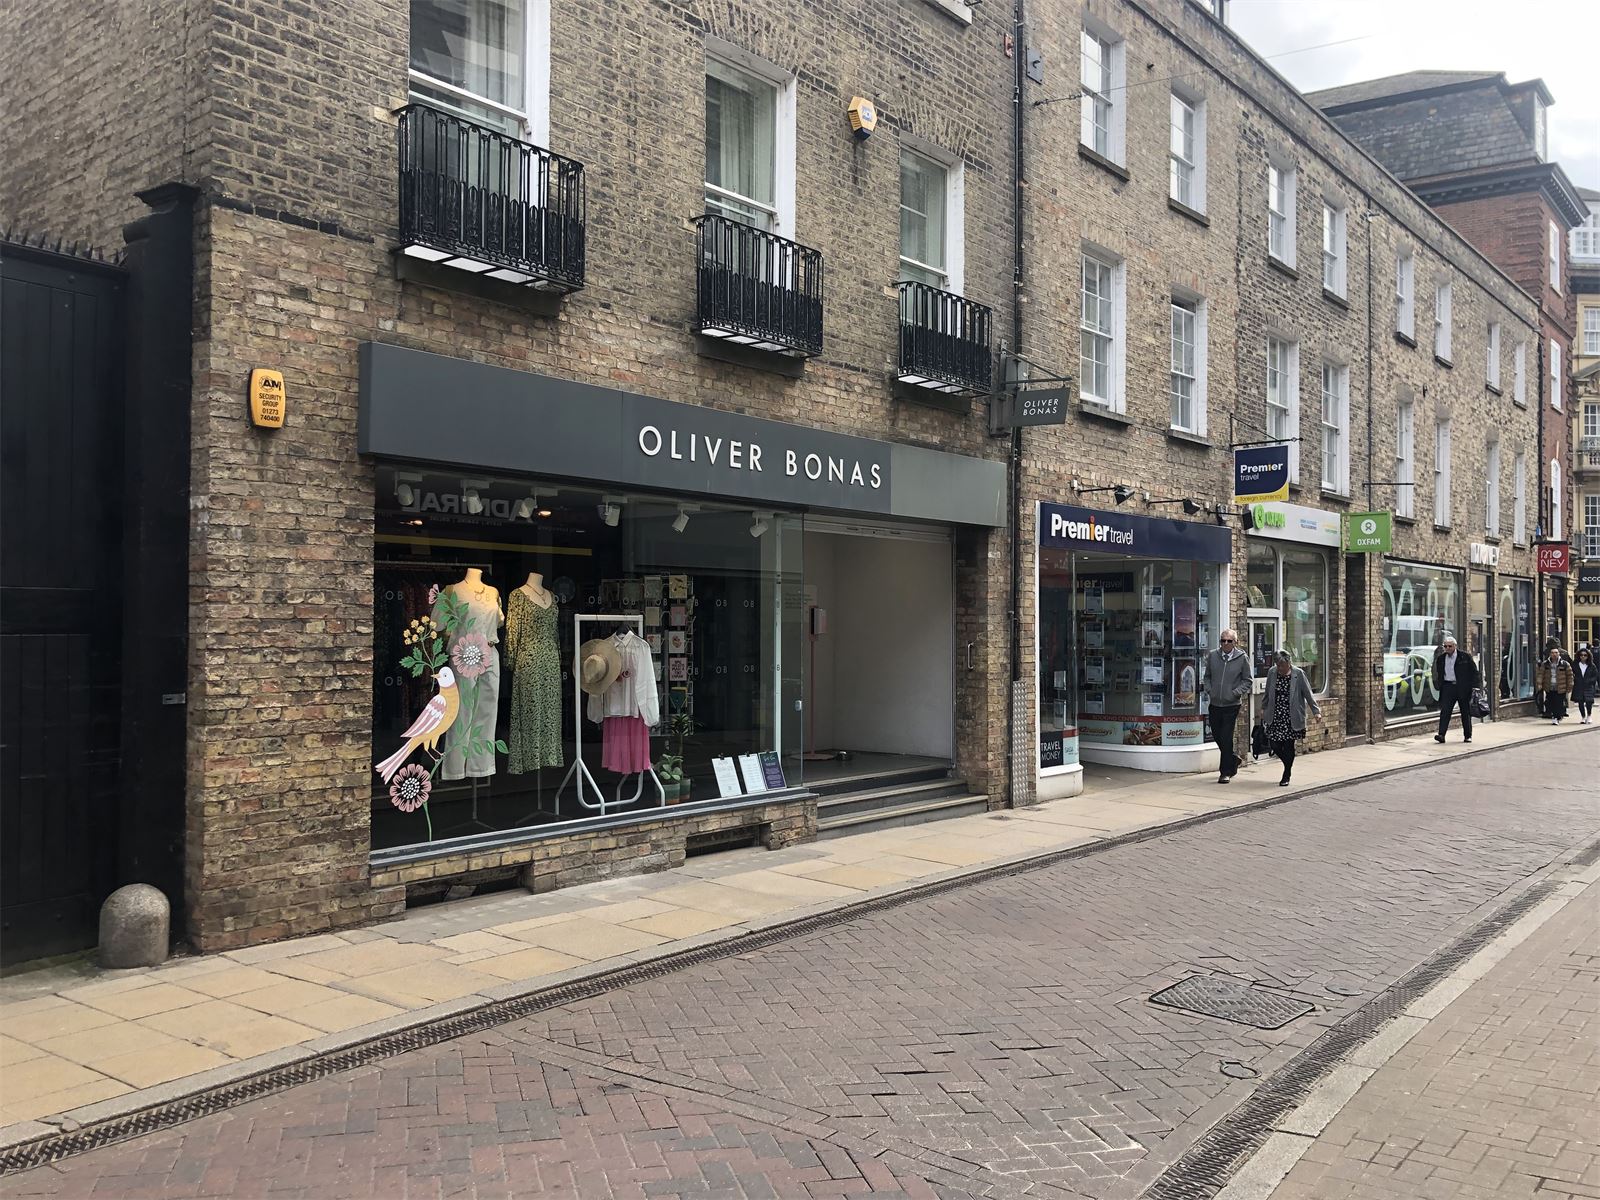 Commercial property to let in Cambridge - Cheffins Commercial